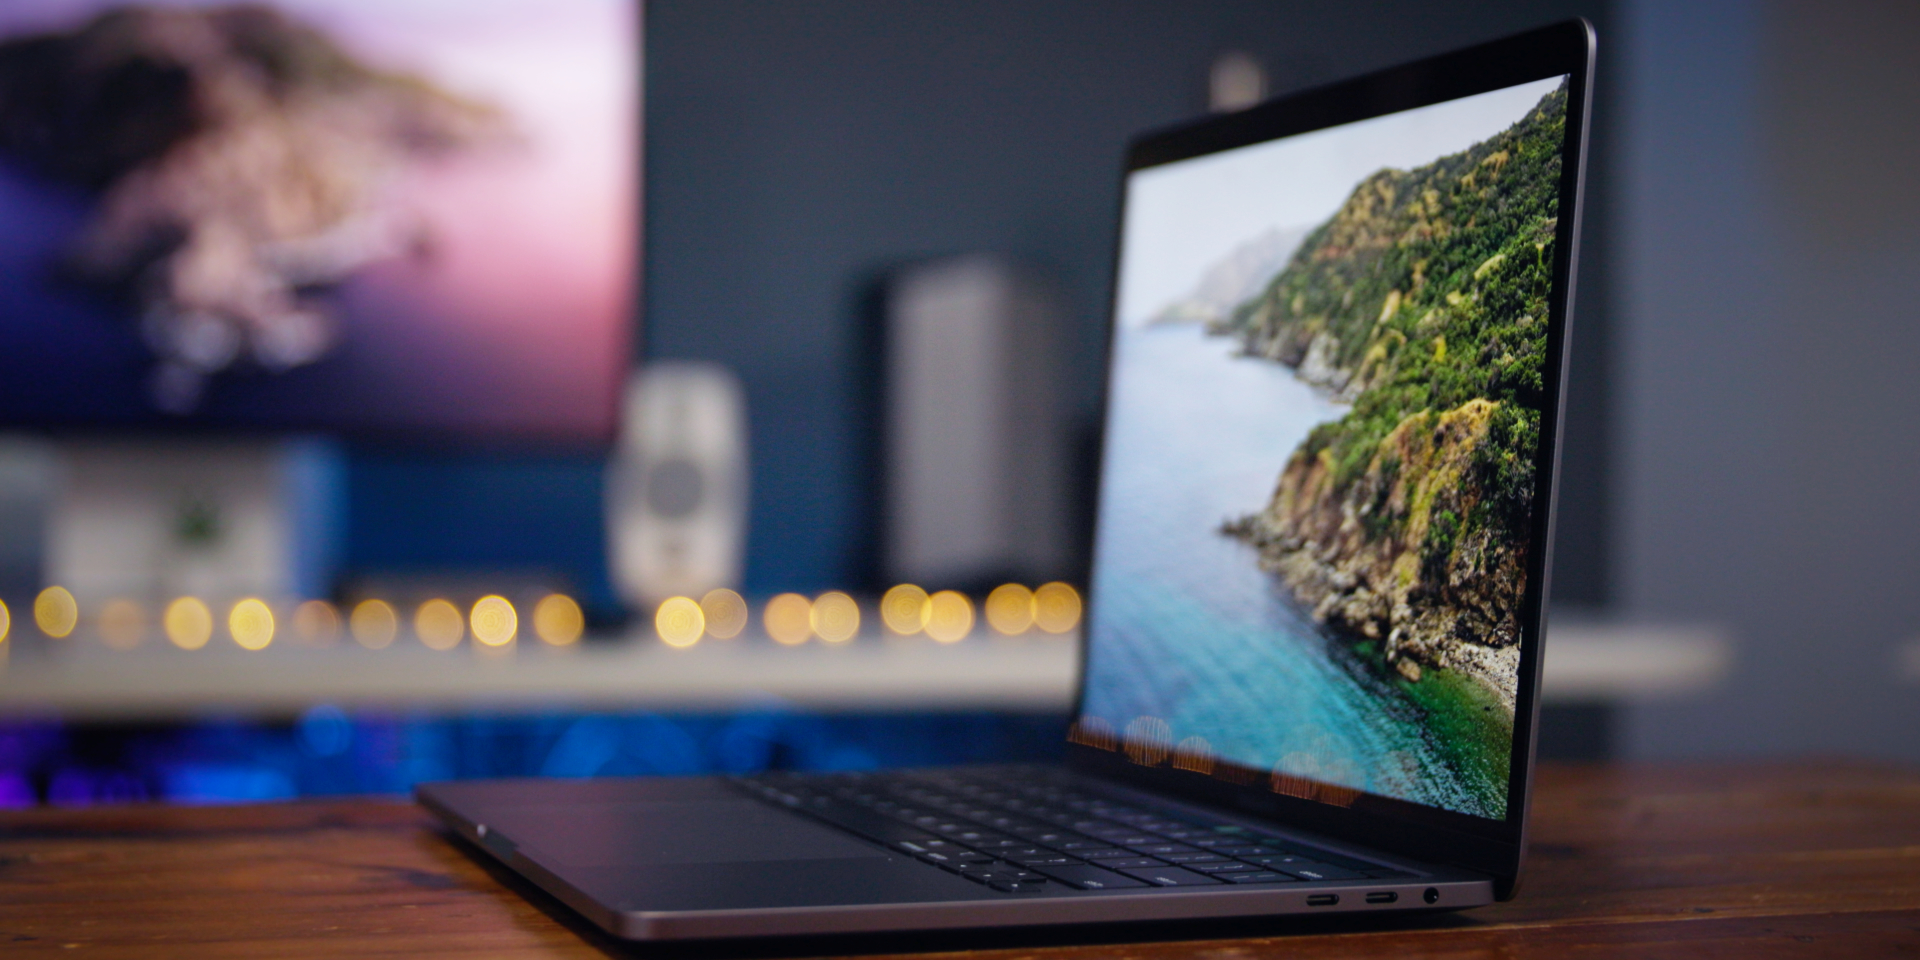 Hands-on: 13-inch MacBook Pro (2020) - a long time coming [Video